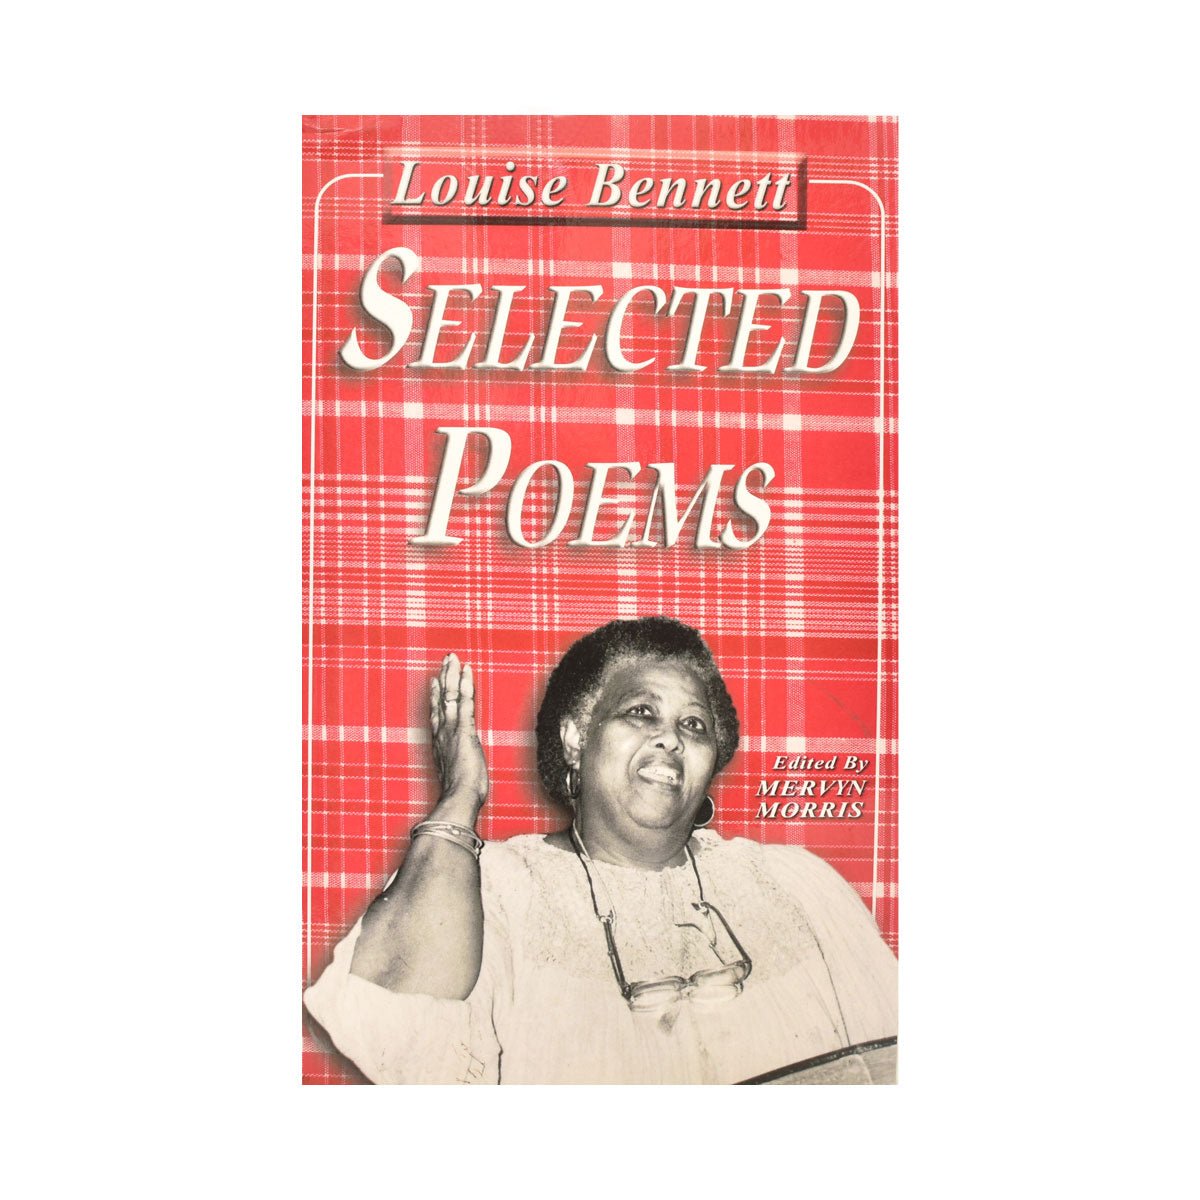 Sangster's　Stores　Poems　Book　Selected　Caribshopper